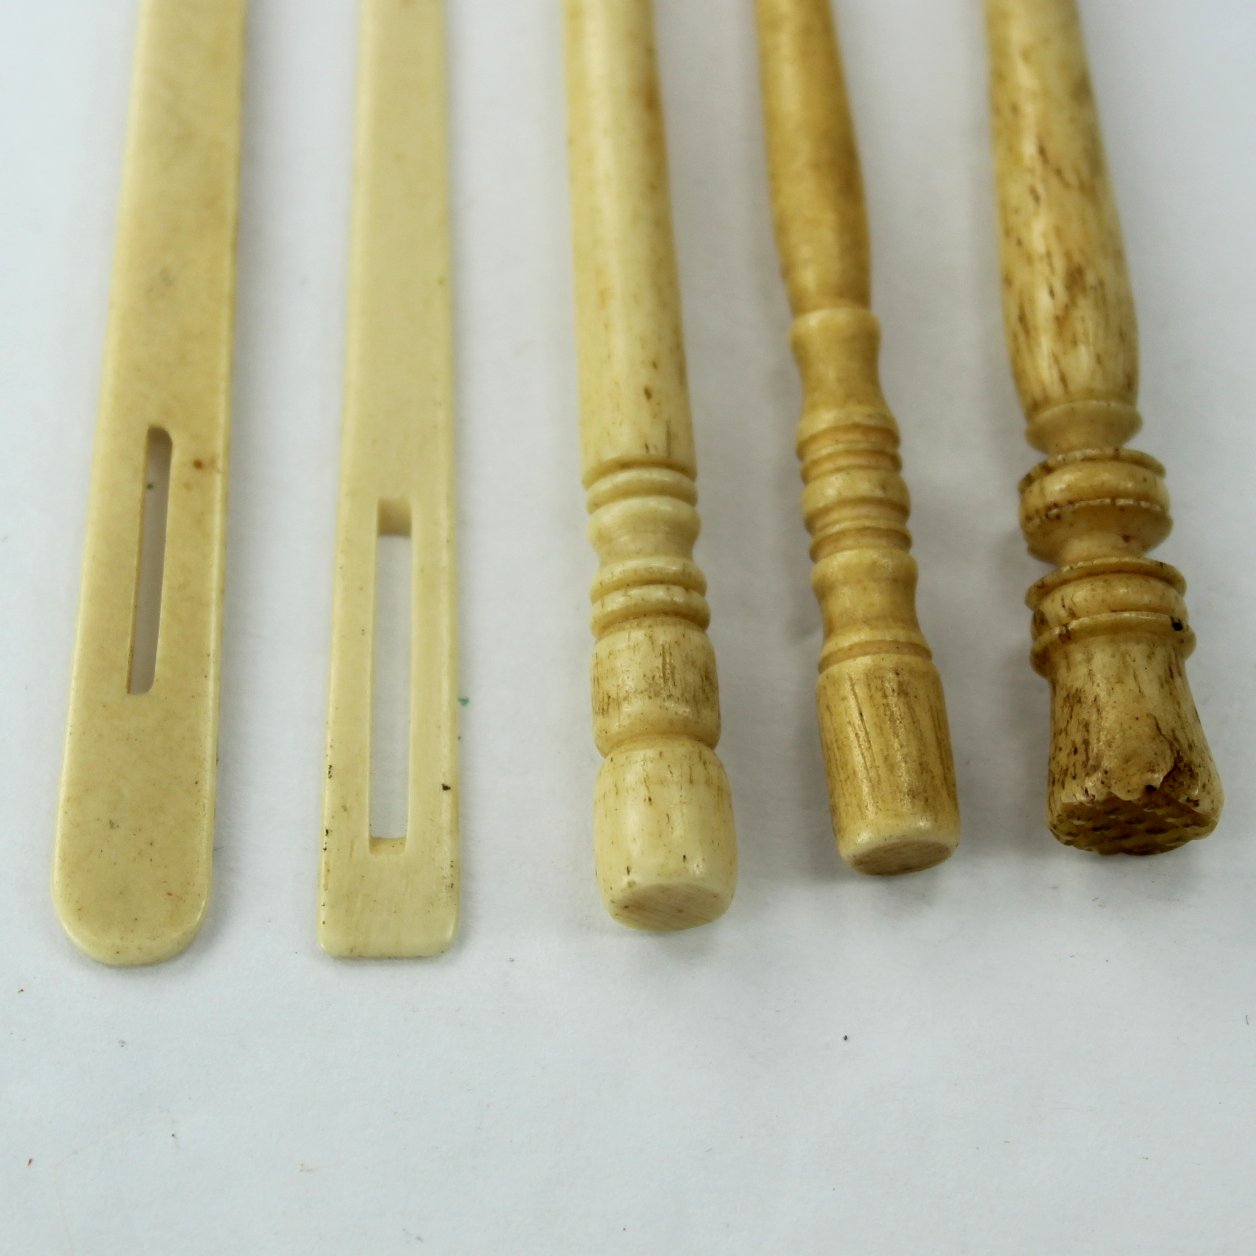 Collection 5 Antique Bone Bodkins Awl Lace Tapestry Tools closeup view